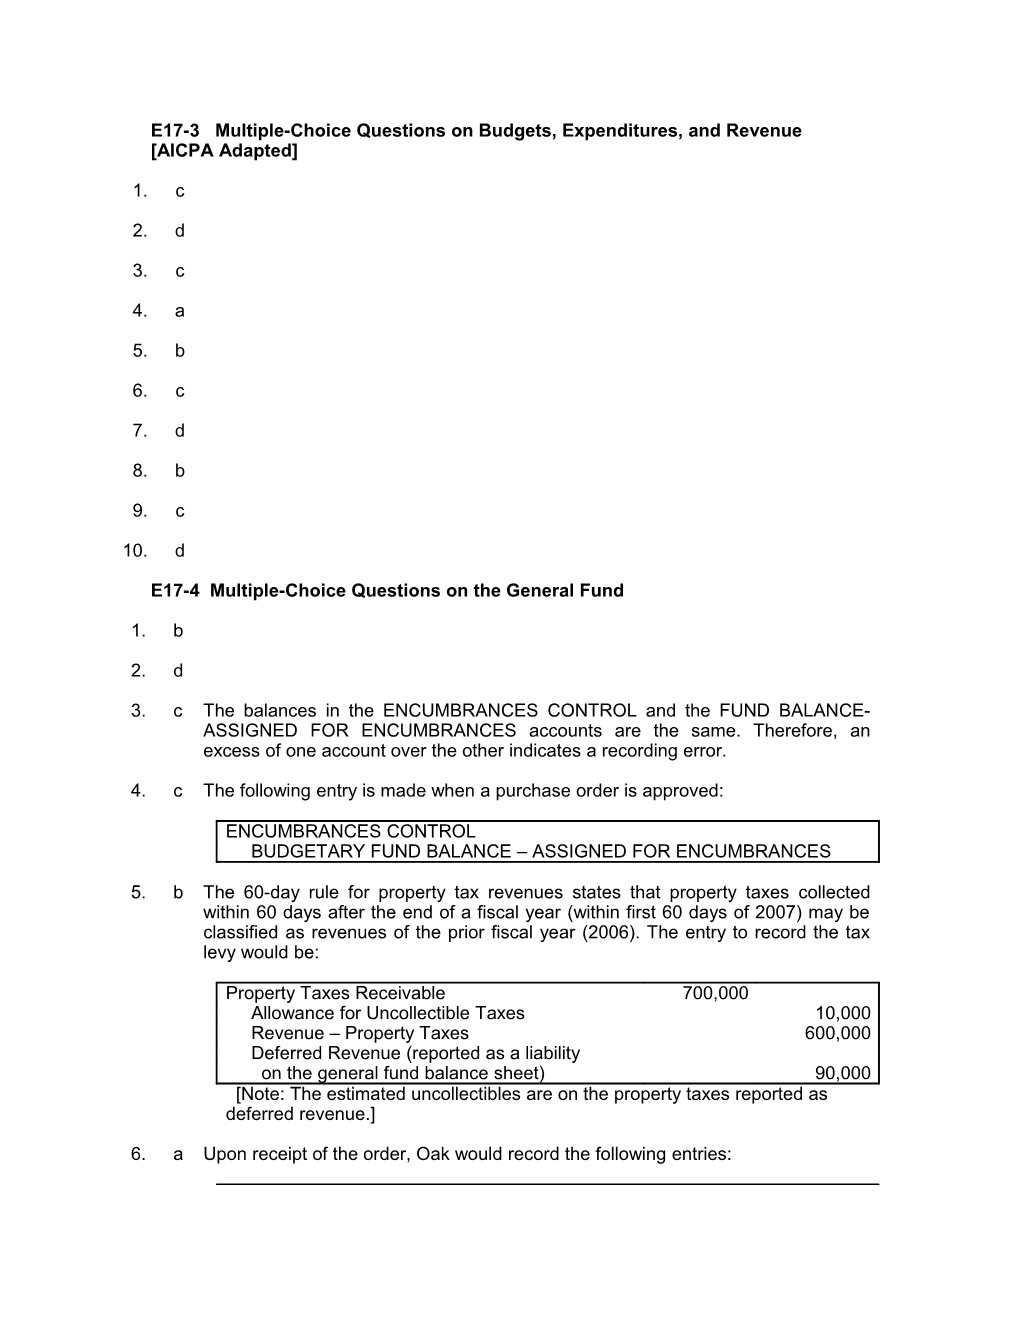 E17-3 Multiple-Choice Questions on Budgets, Expenditures, and Revenue AICPA Adapted